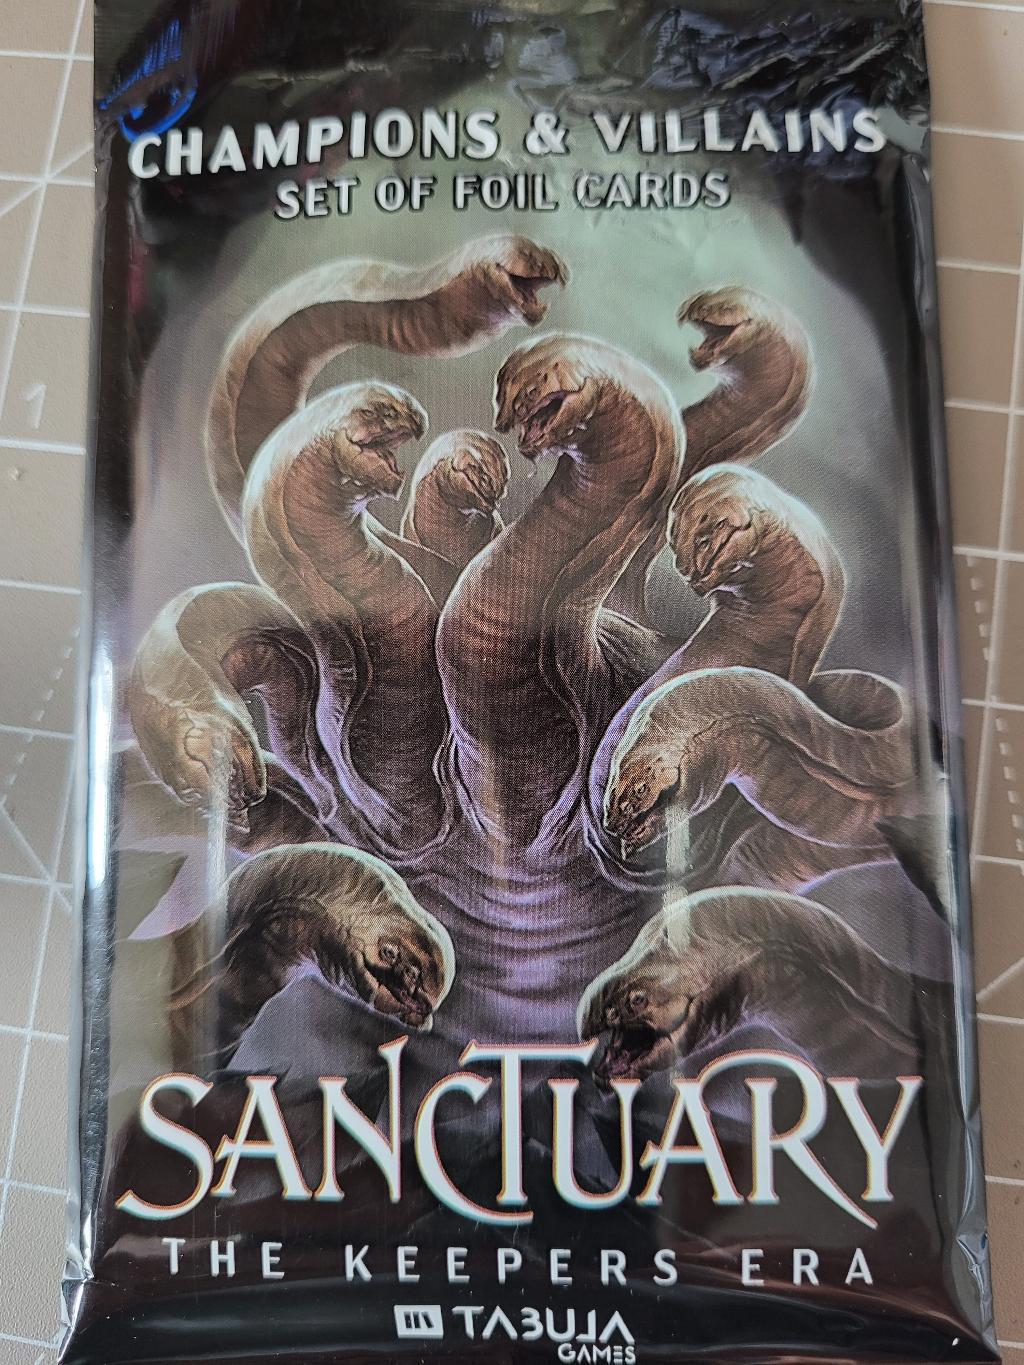 Sanctuary: The Keepers Era - Champions & Villains Set Of Foil Cards